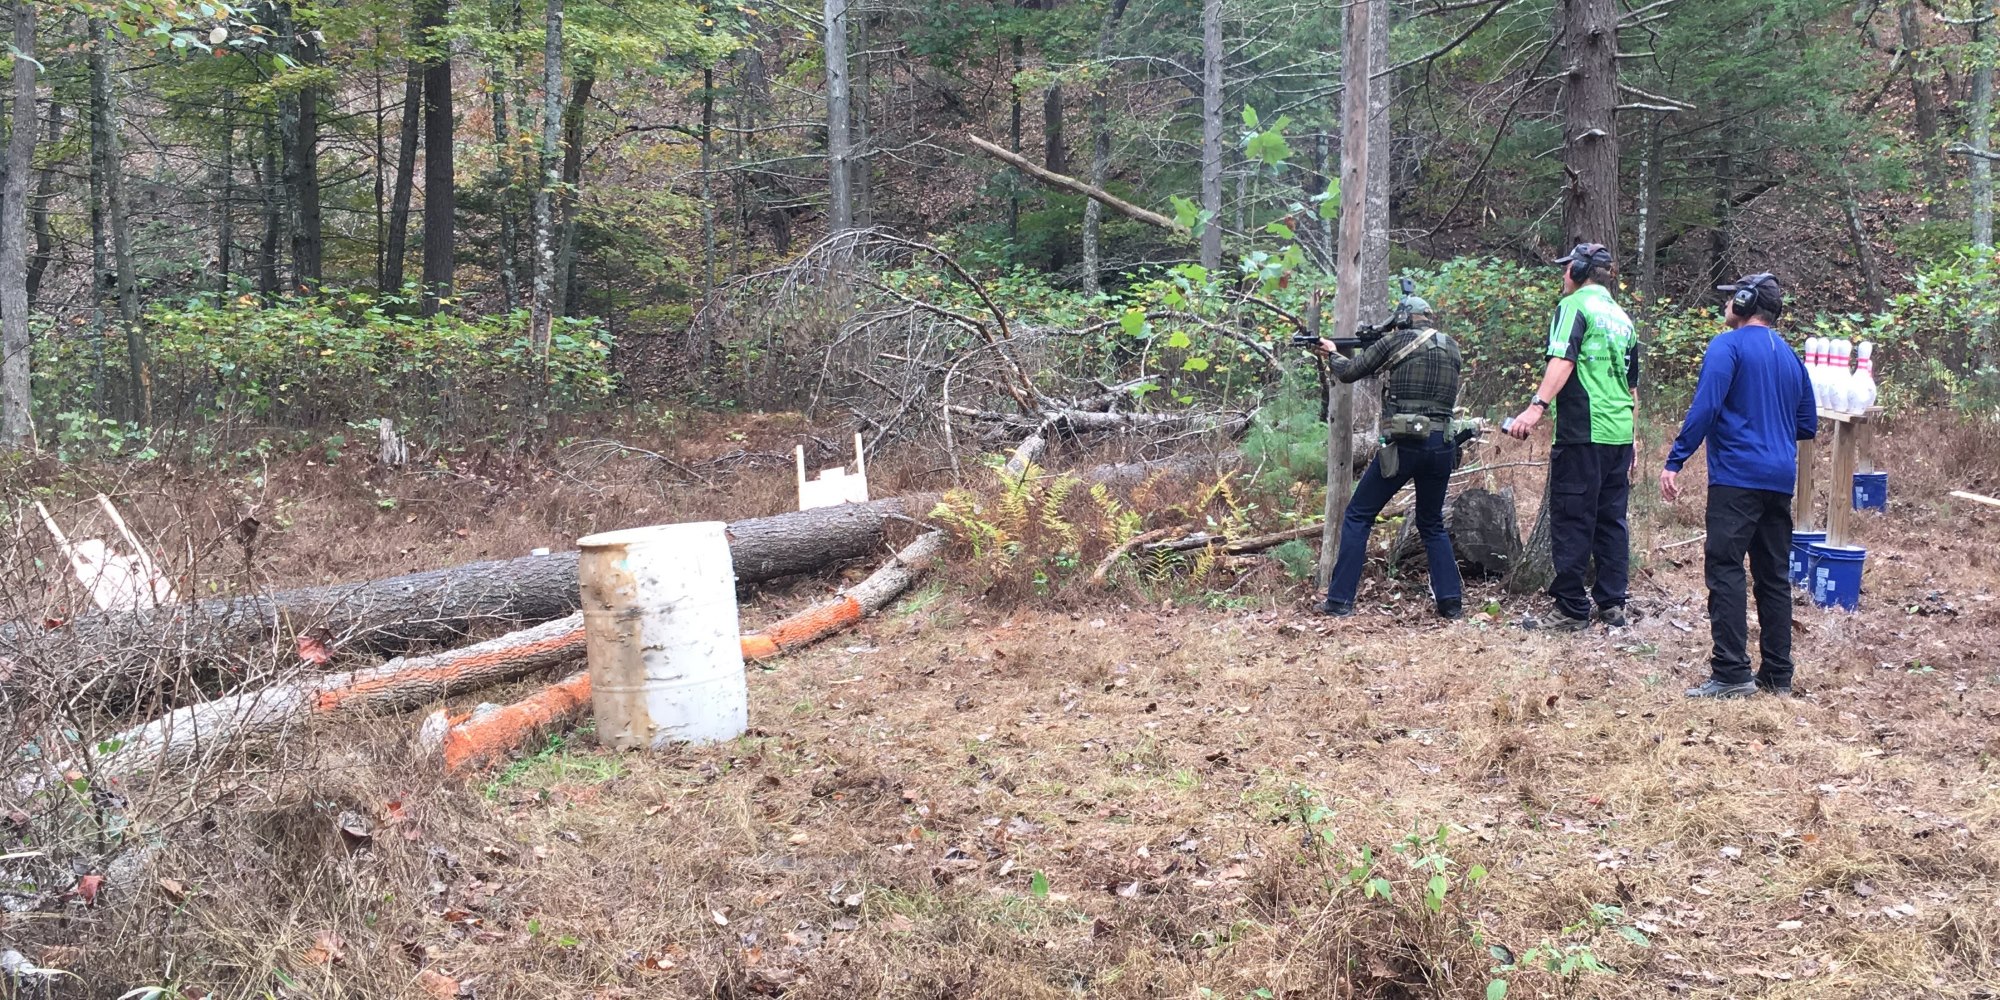 A shooting spot in the woods with the shooter and two officials.